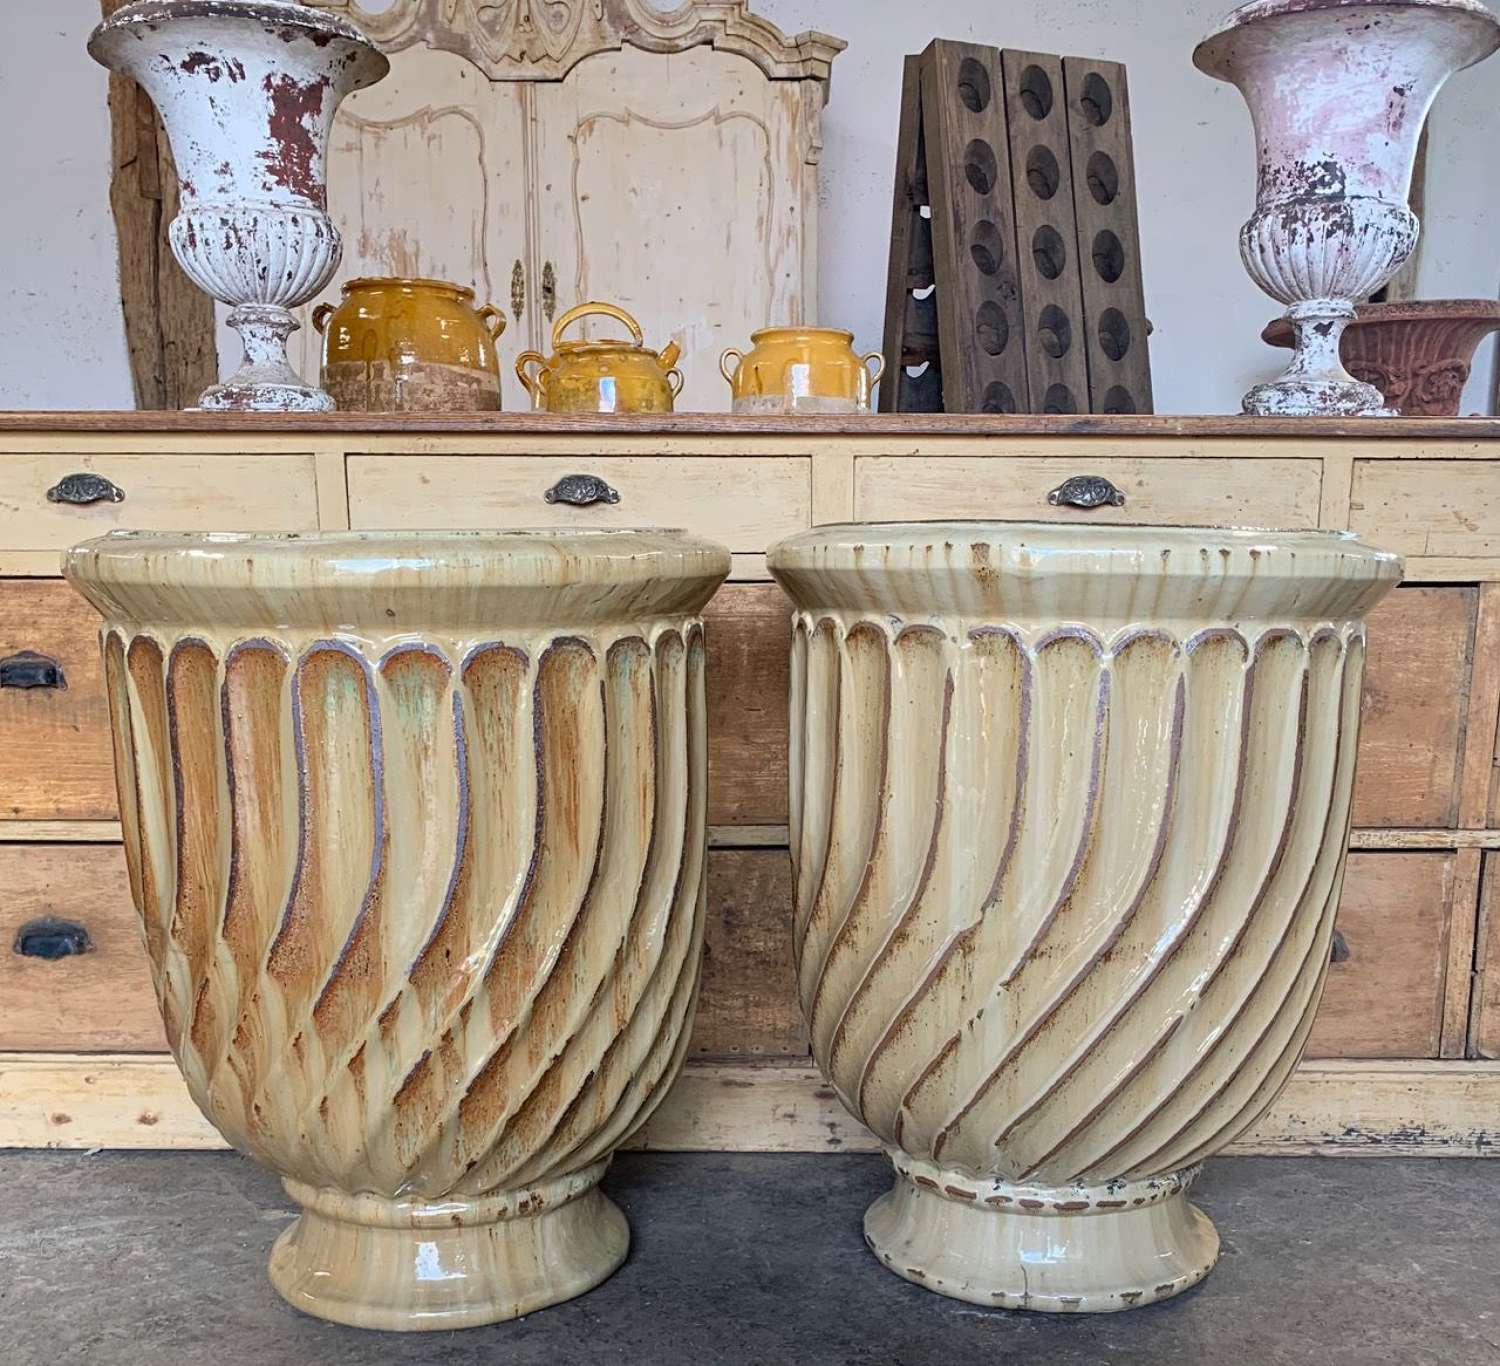 LARGE PAIR OF ANDUZE TERRACOTTA PLANTERS